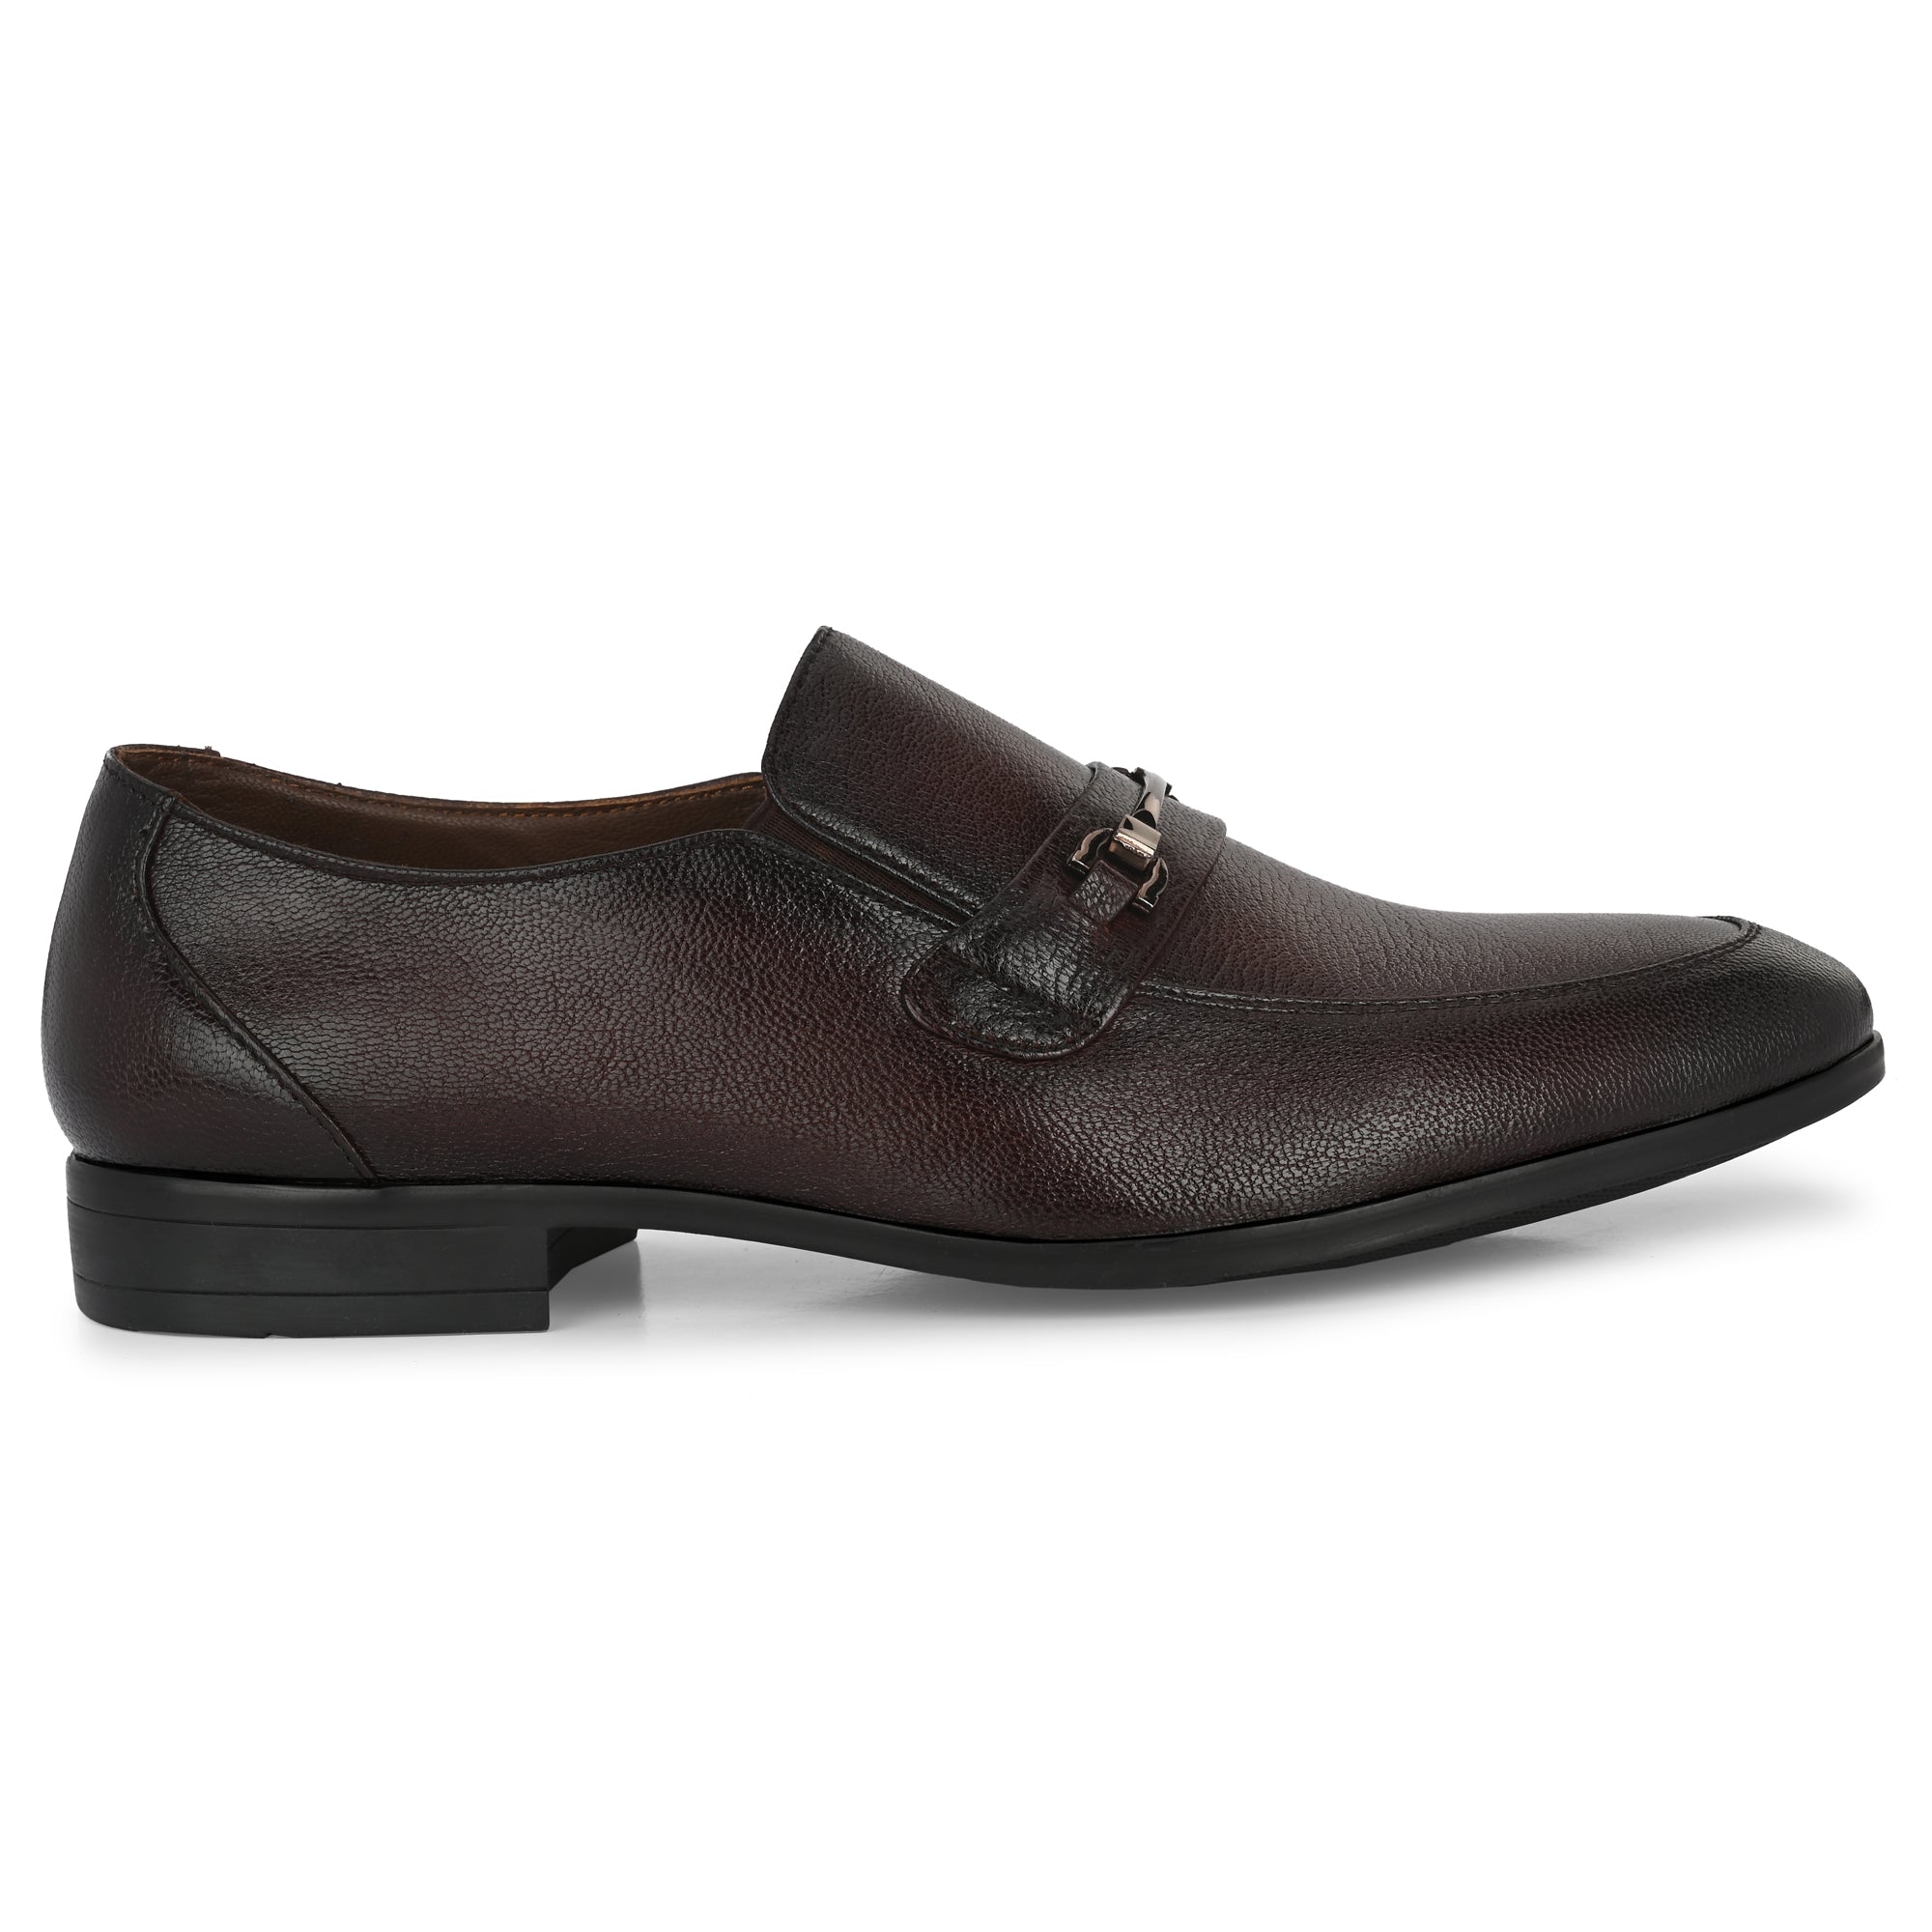 Buckled Formal Shoes For Men by Egoss